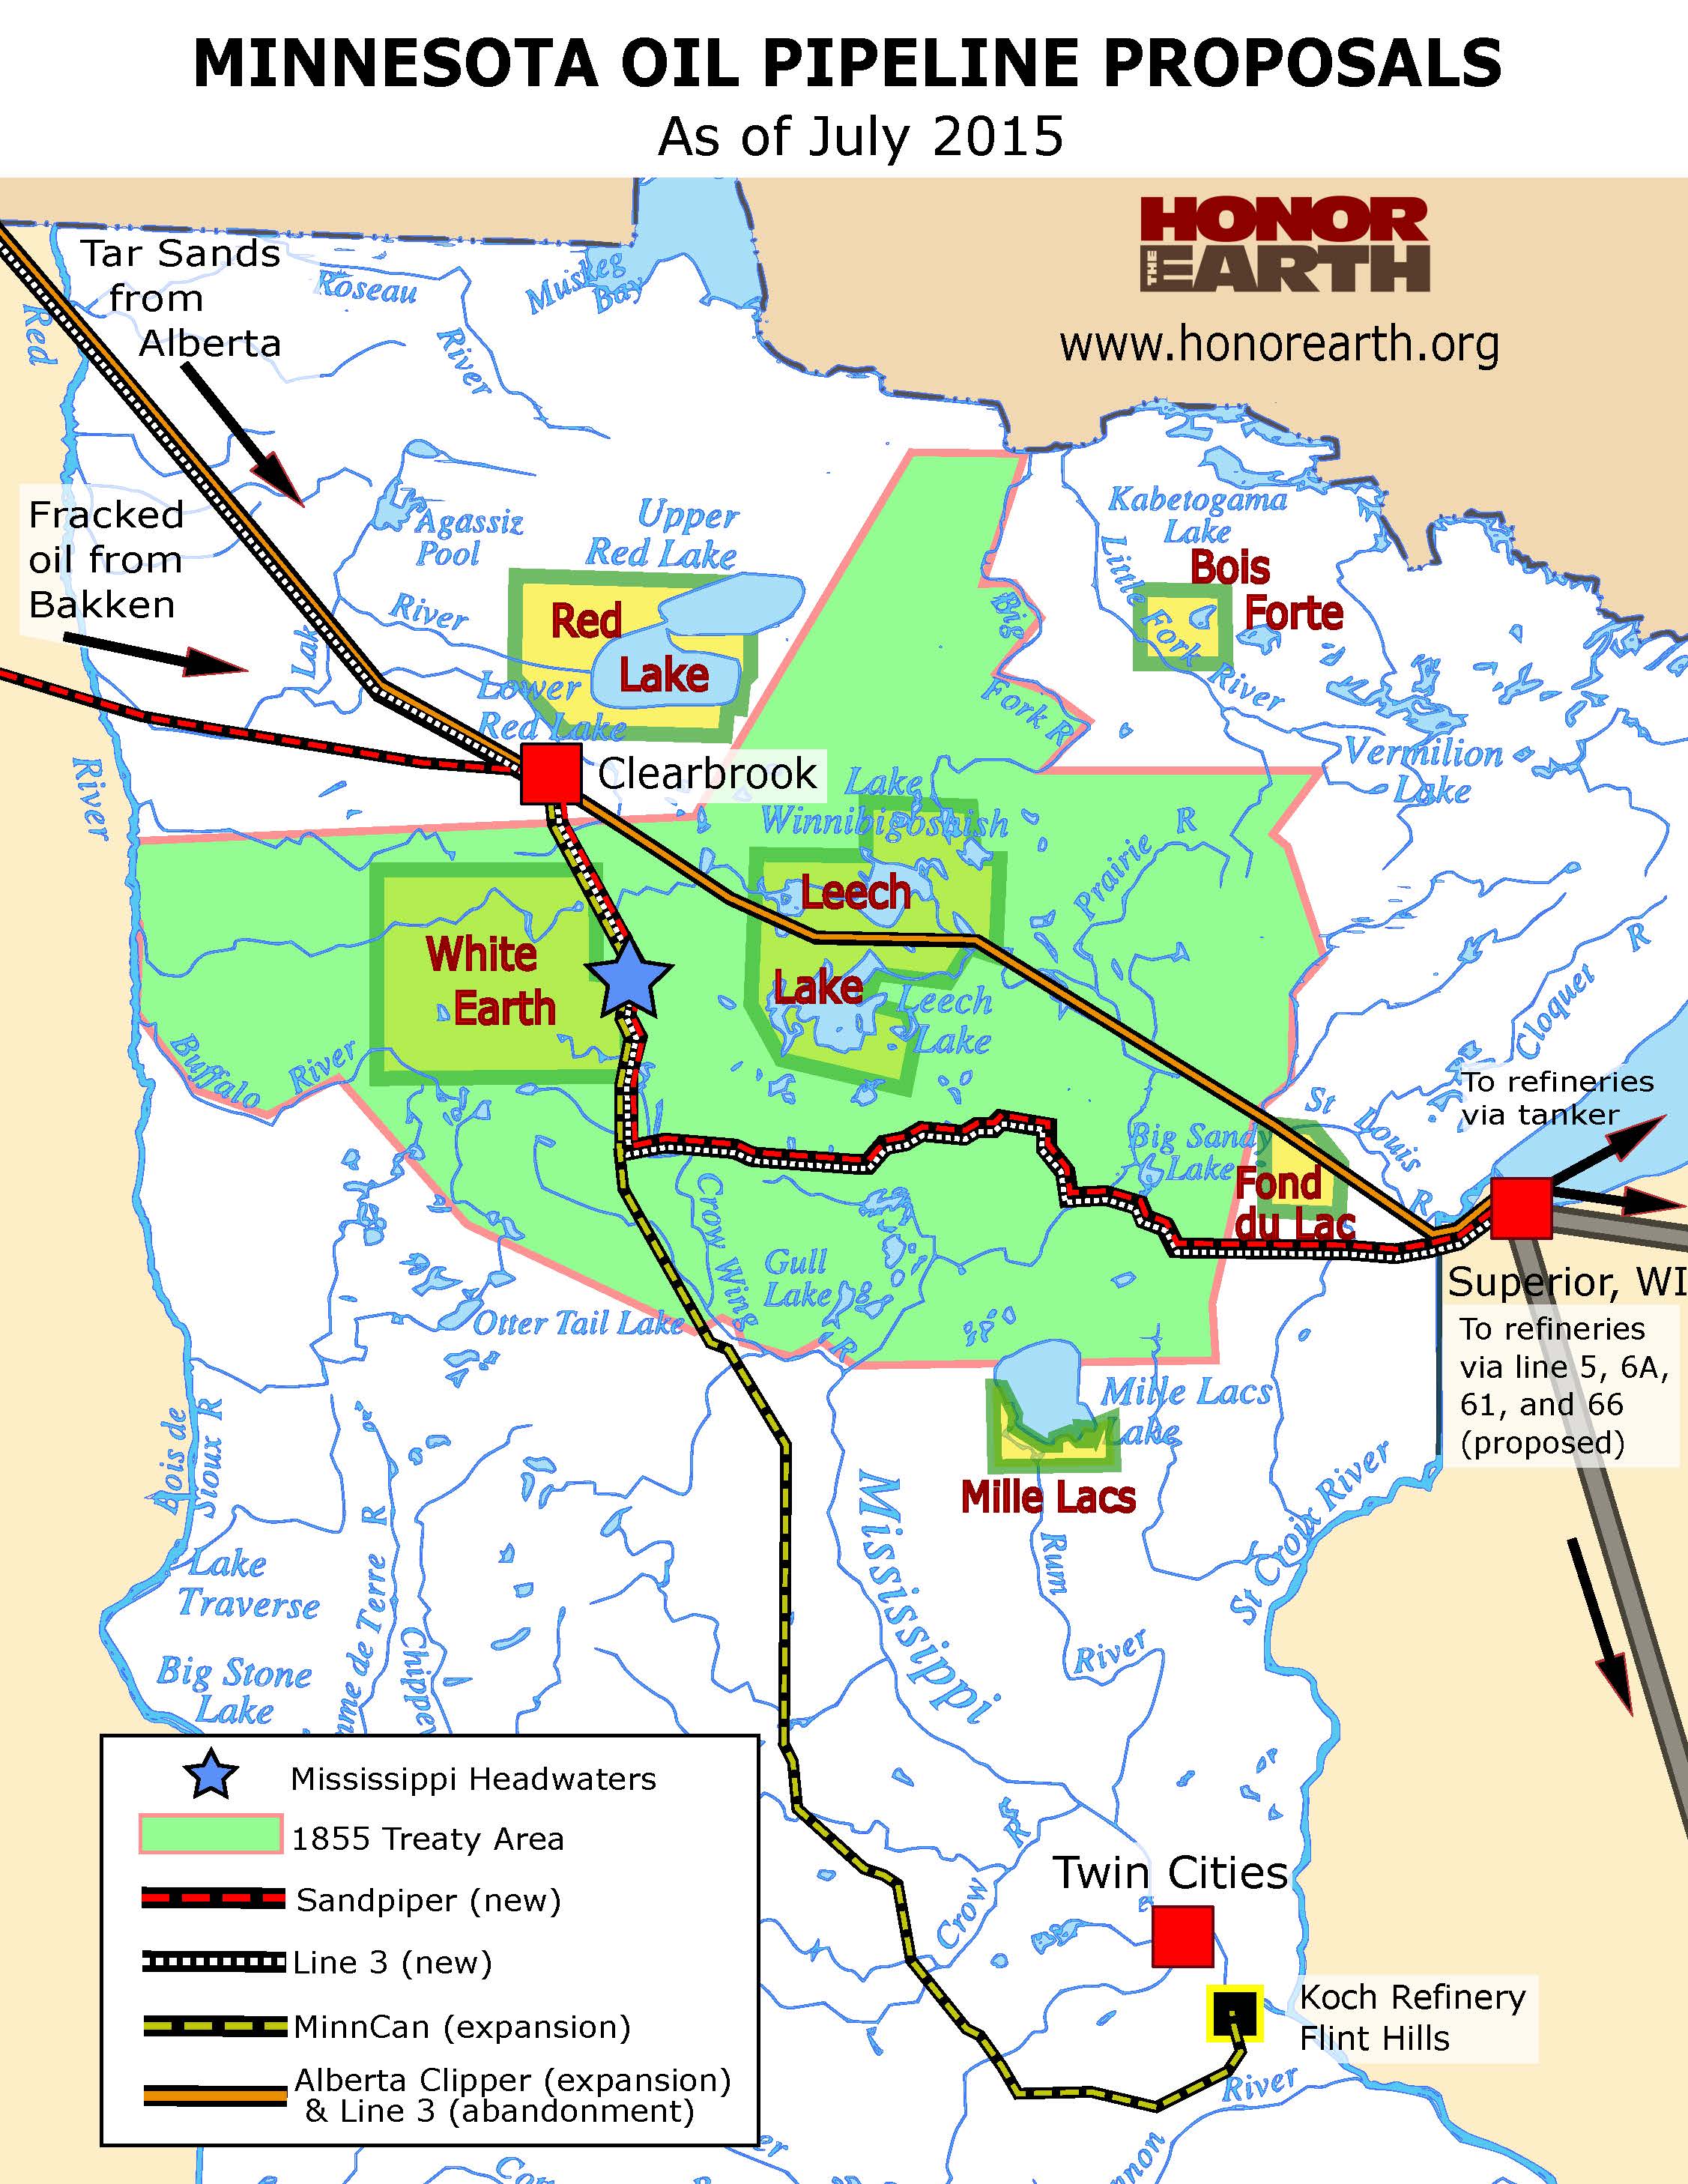 MN oil pipeline proposals Honor the Earth